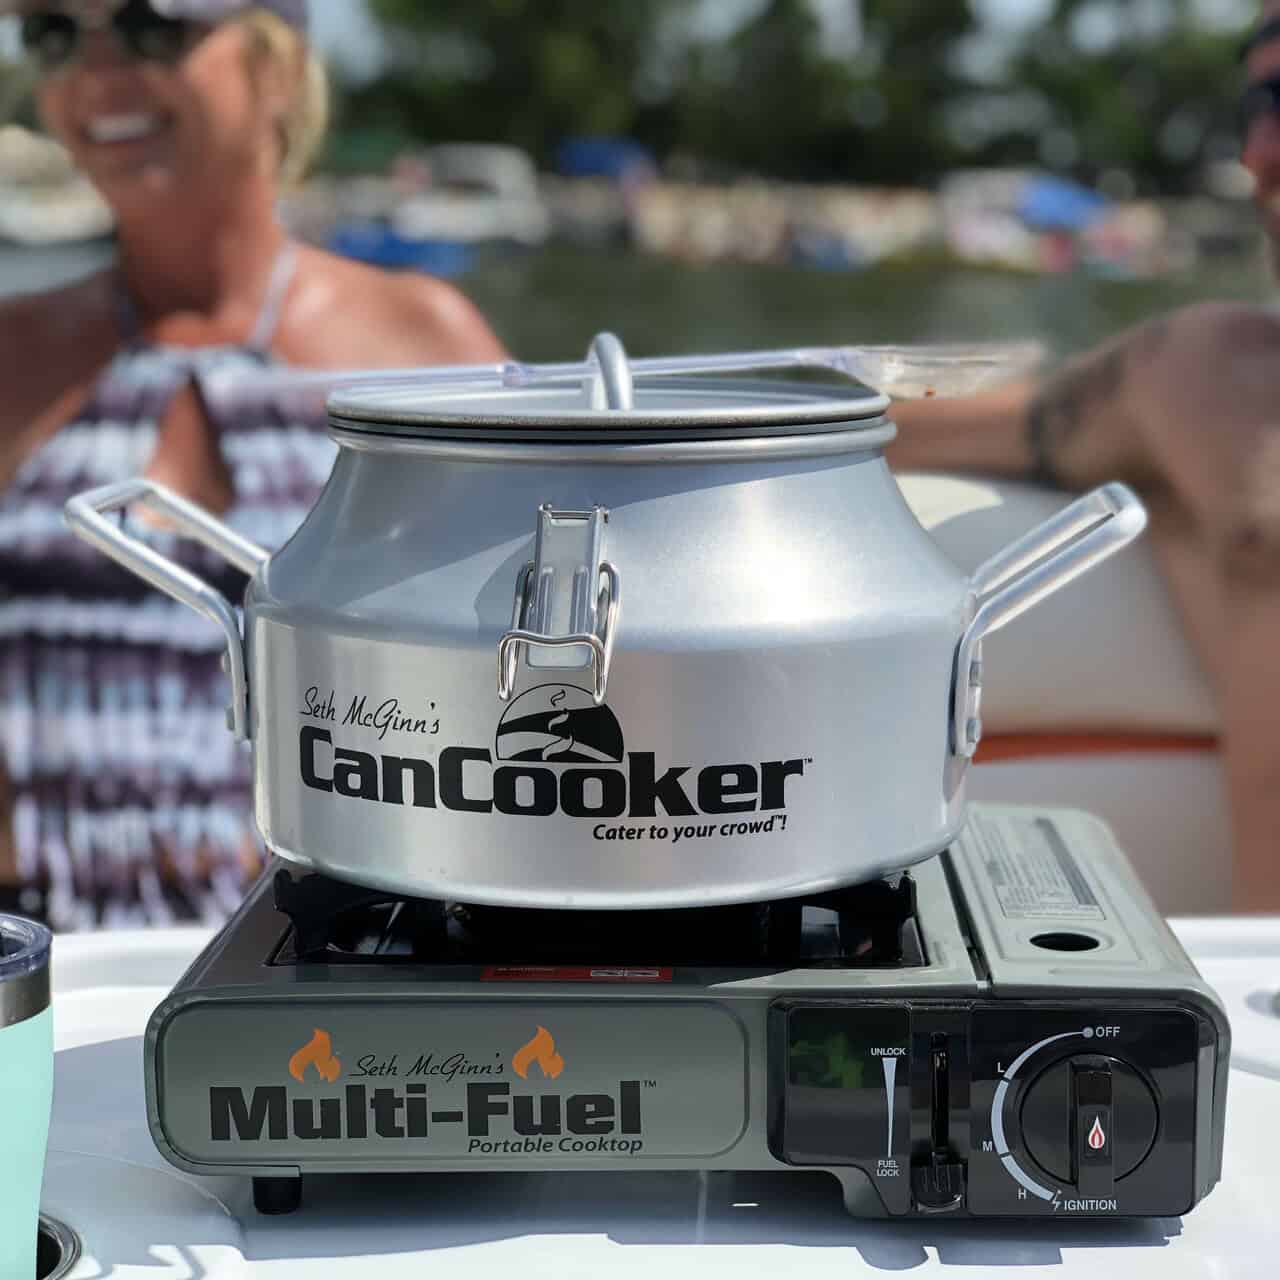 CanCooker SMDF-1401 Portable Multi-Fuel Electric Cooktop Single Burner with Case 